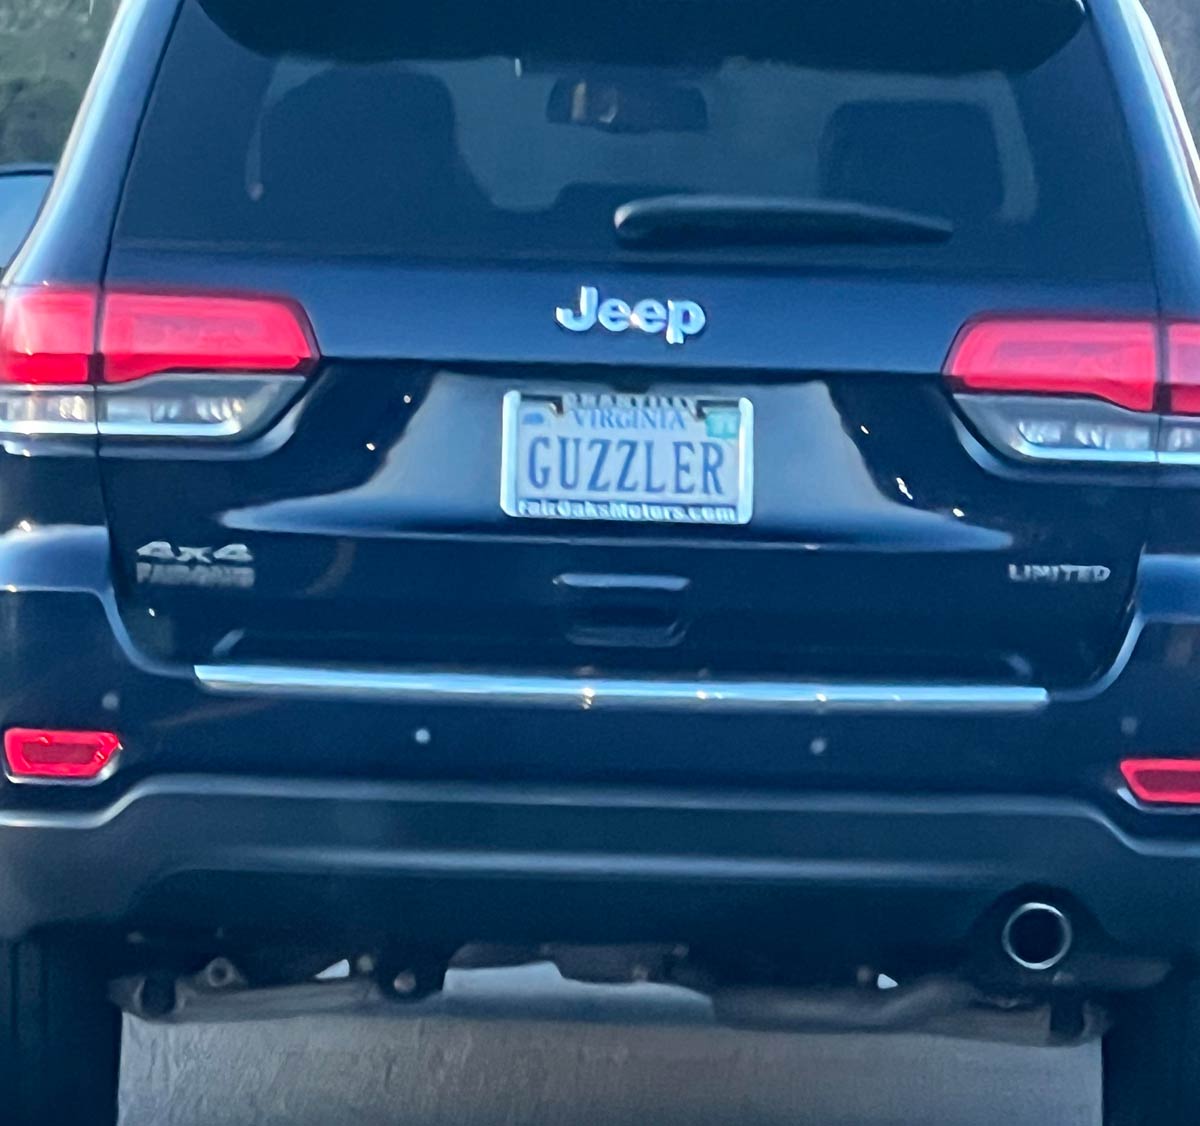 Saw your mom driving today